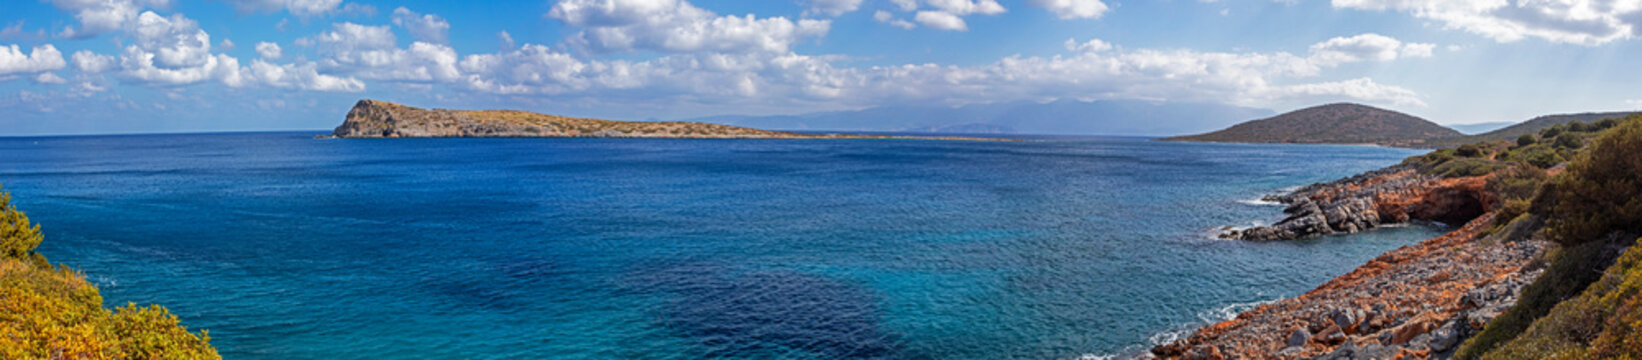 beautiful panoramic view with clouds from the bay near the sunken city of Olus, on the island of Crete on a sunny day, windy day, horizontal.